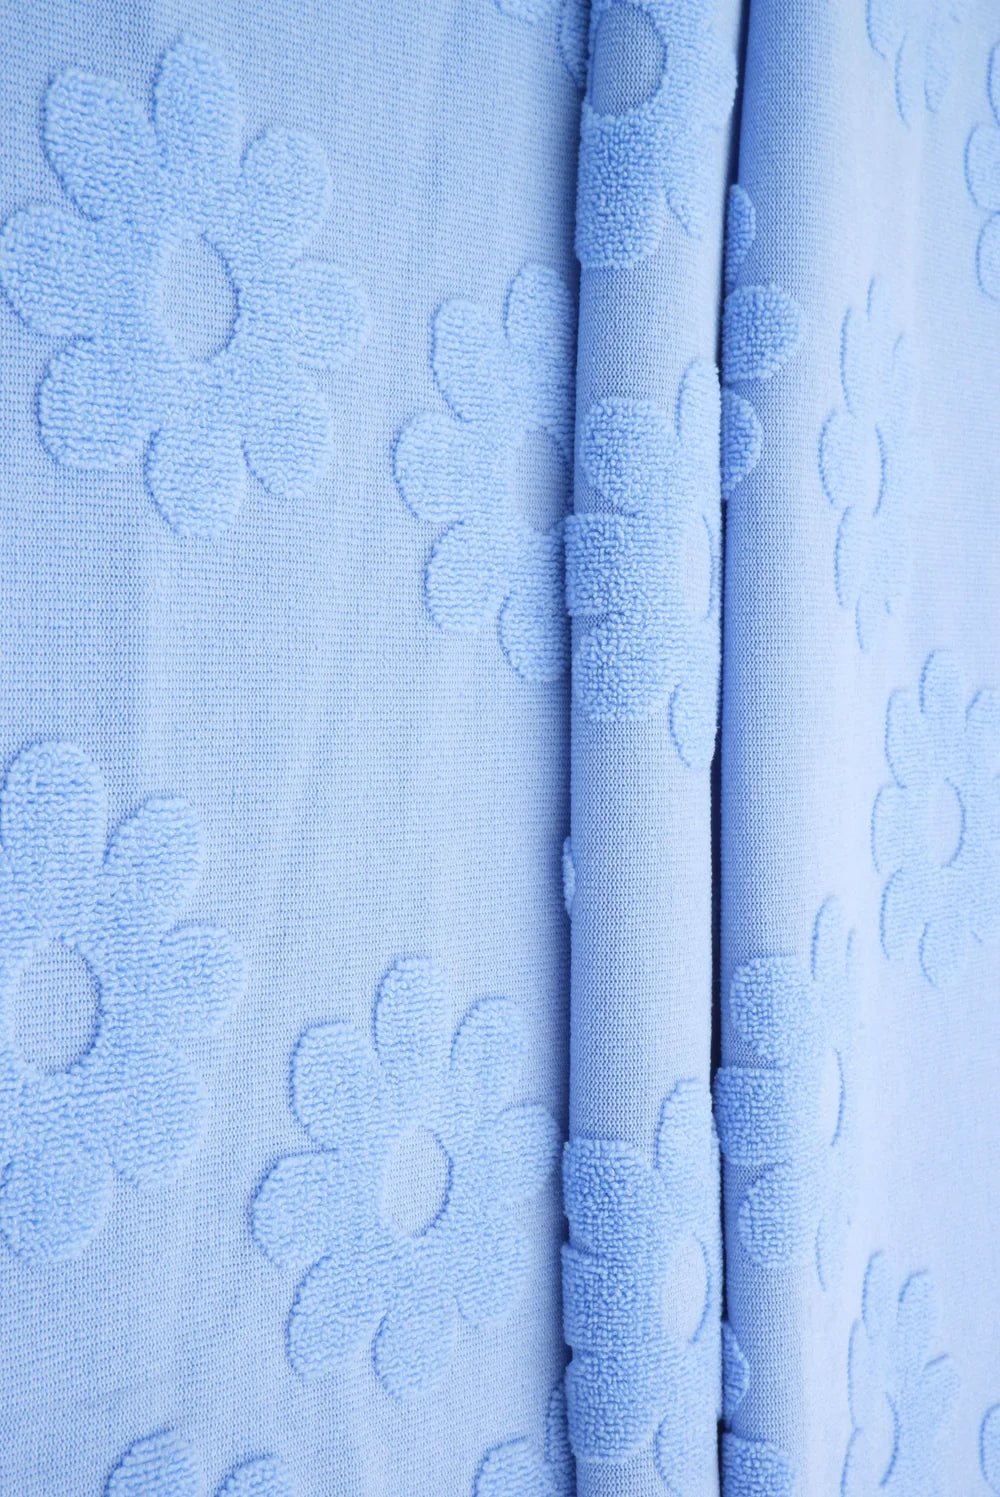 RTS Light Blue Flowers (sold in bundles of 2 yards)